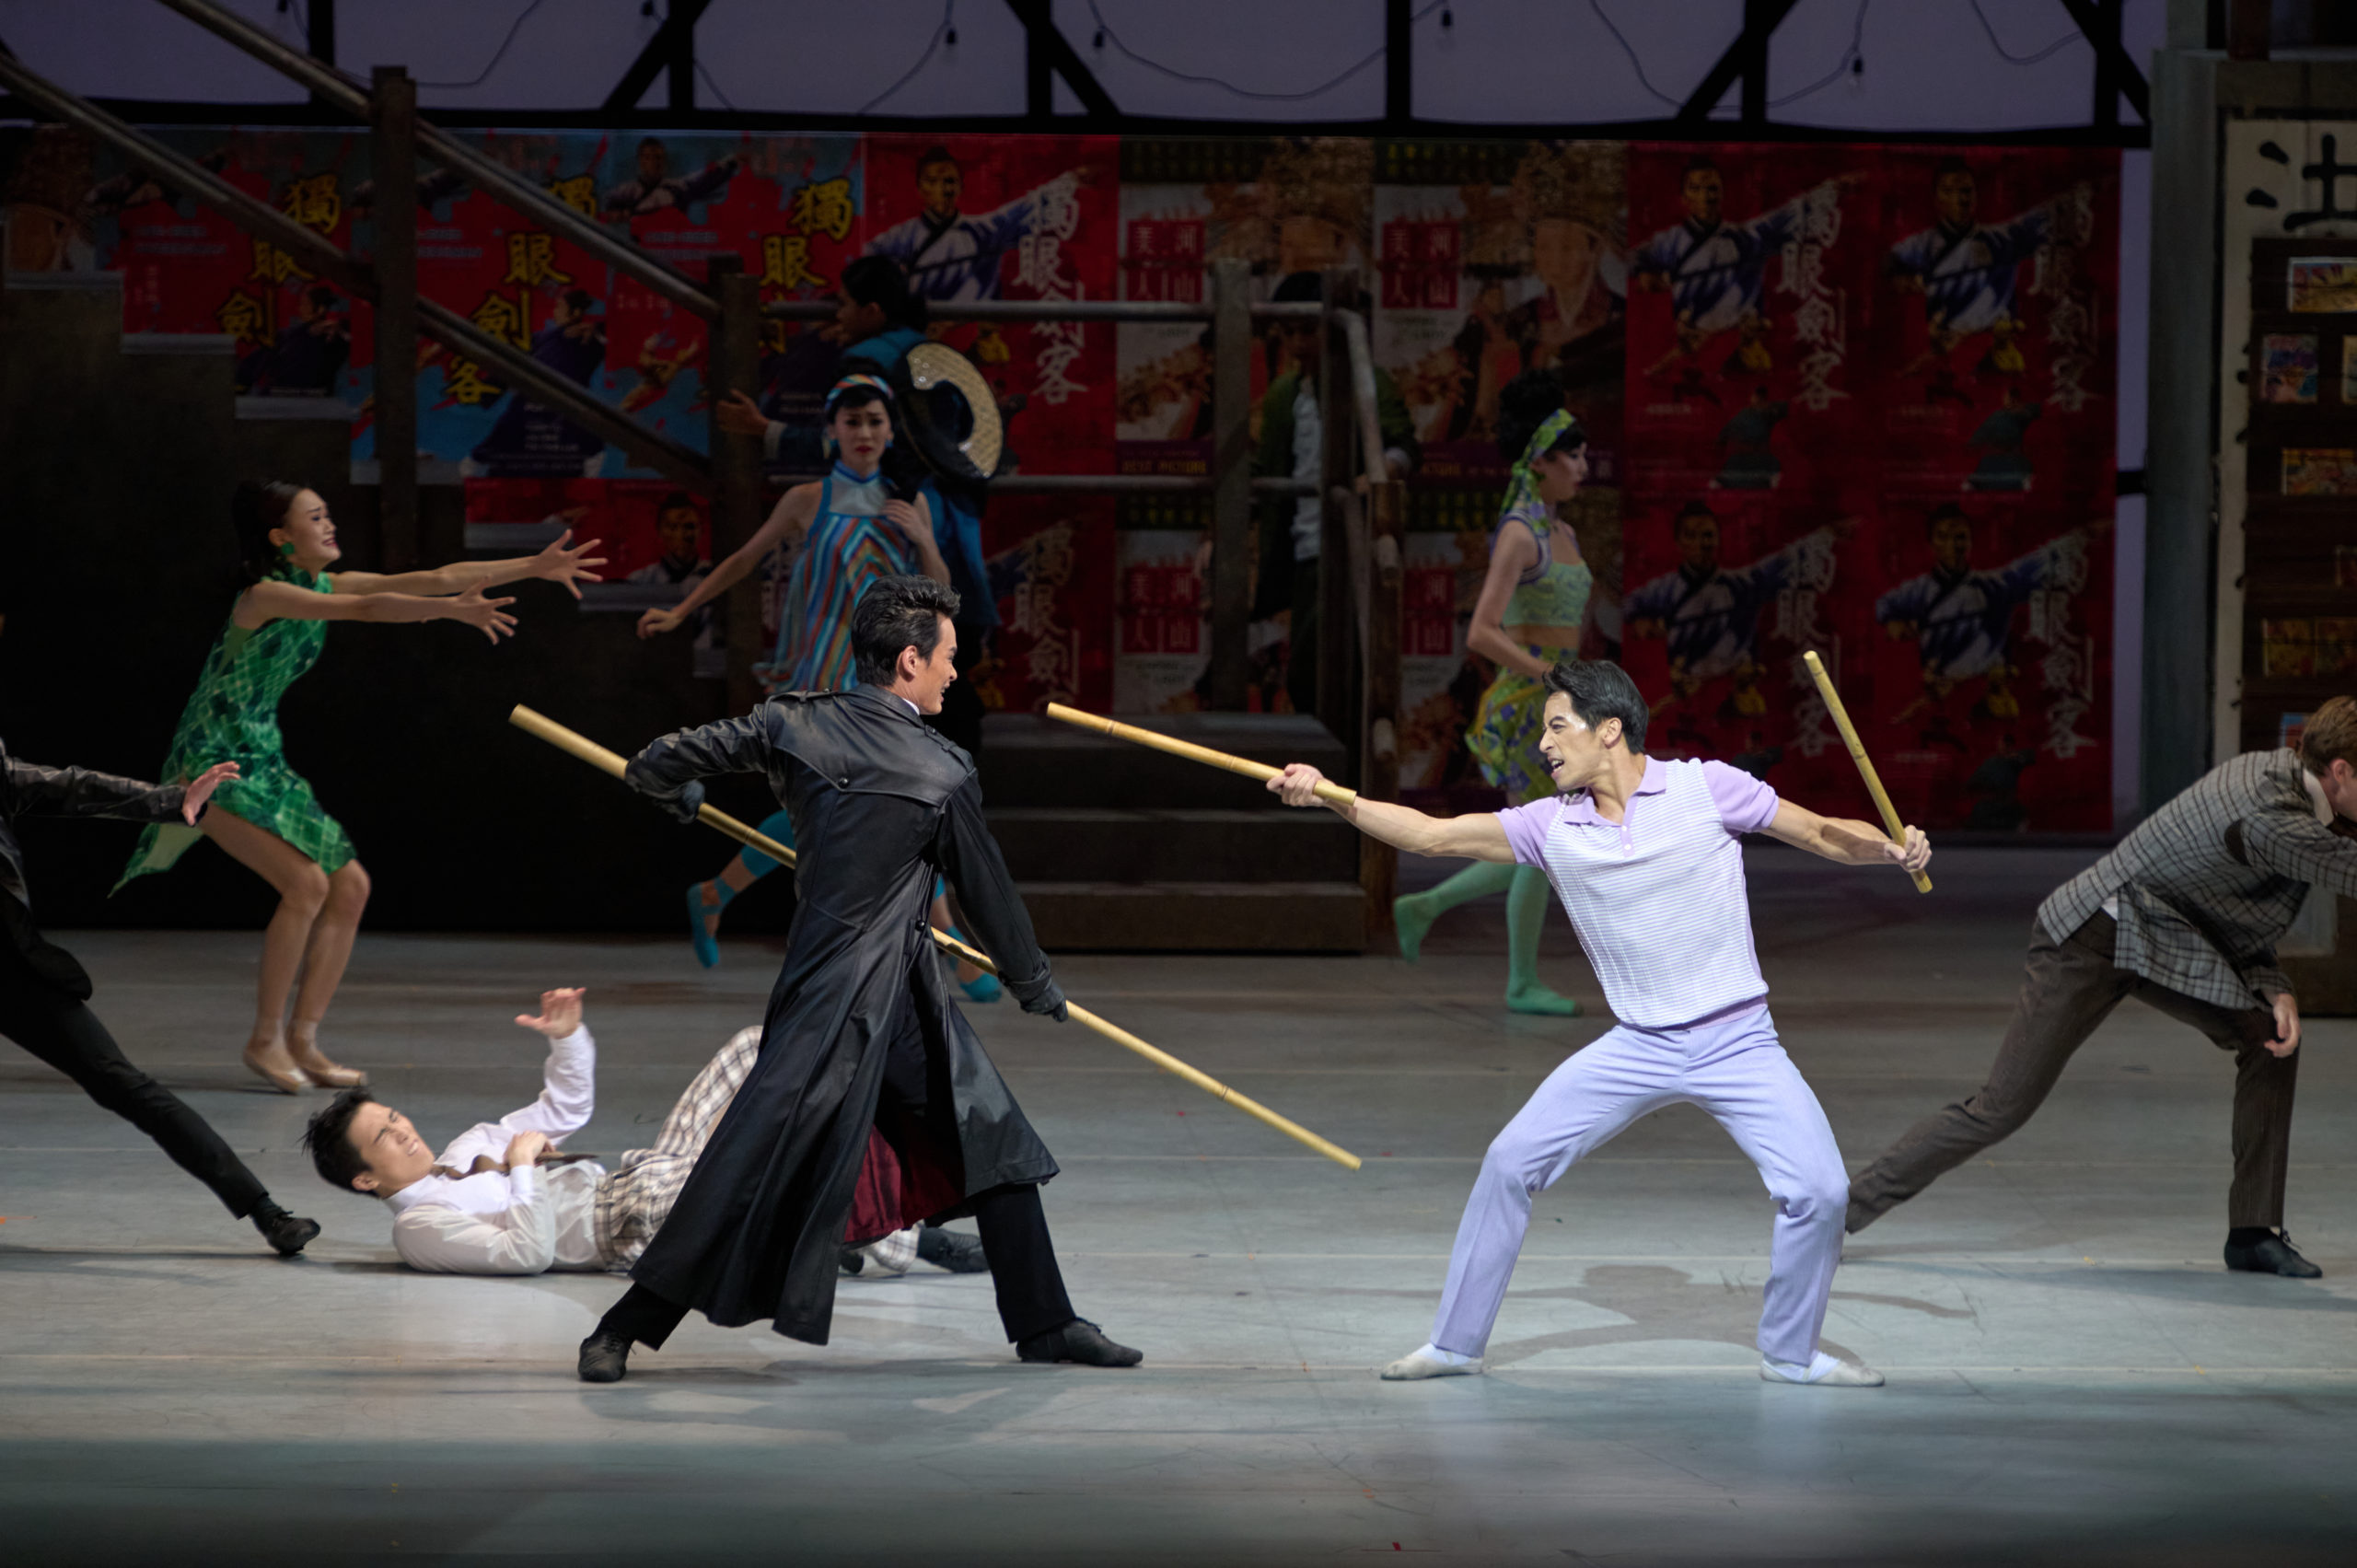 Violence erupts onstage, two male dancers at the center squaring off. One wears a dramatic black duster and wields a long staff; the other wears lilac pants and a matching shirt and holds a shorter wooden stick in each hand, one of which he brandishes towards his enemy's face. The outfits and decor are evocative of 1960s Hong Kong.